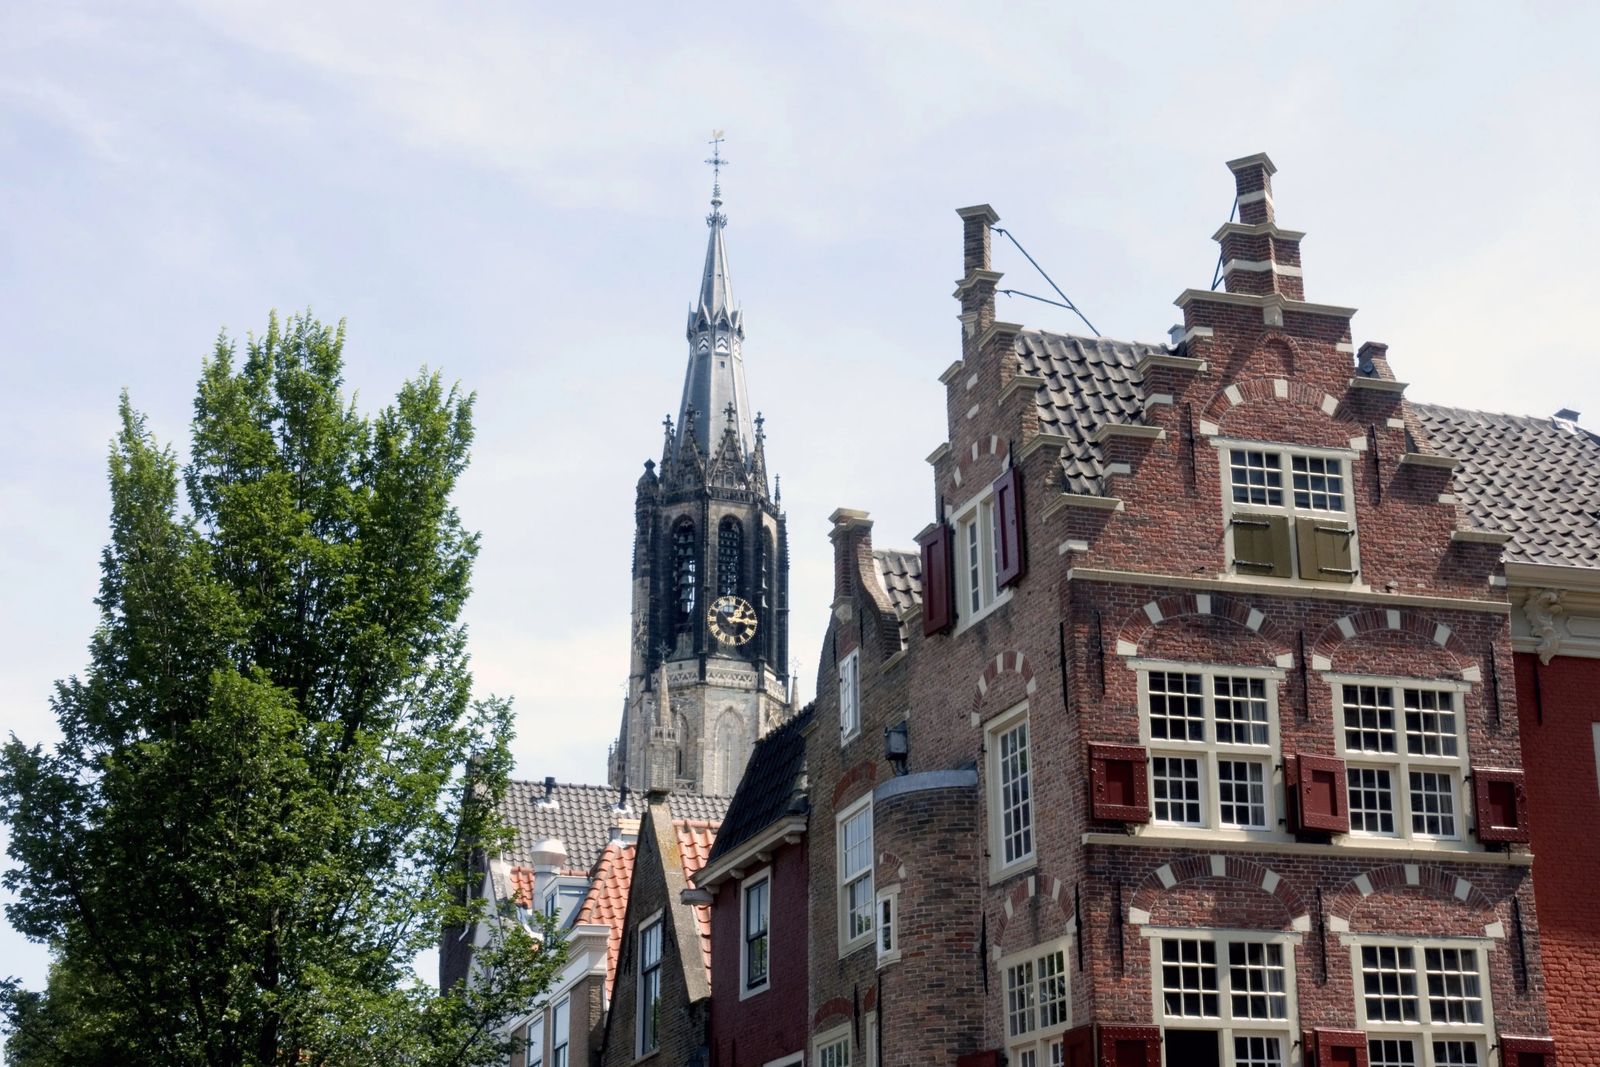 A Delft day trip from Amsterdam - New Church Tower